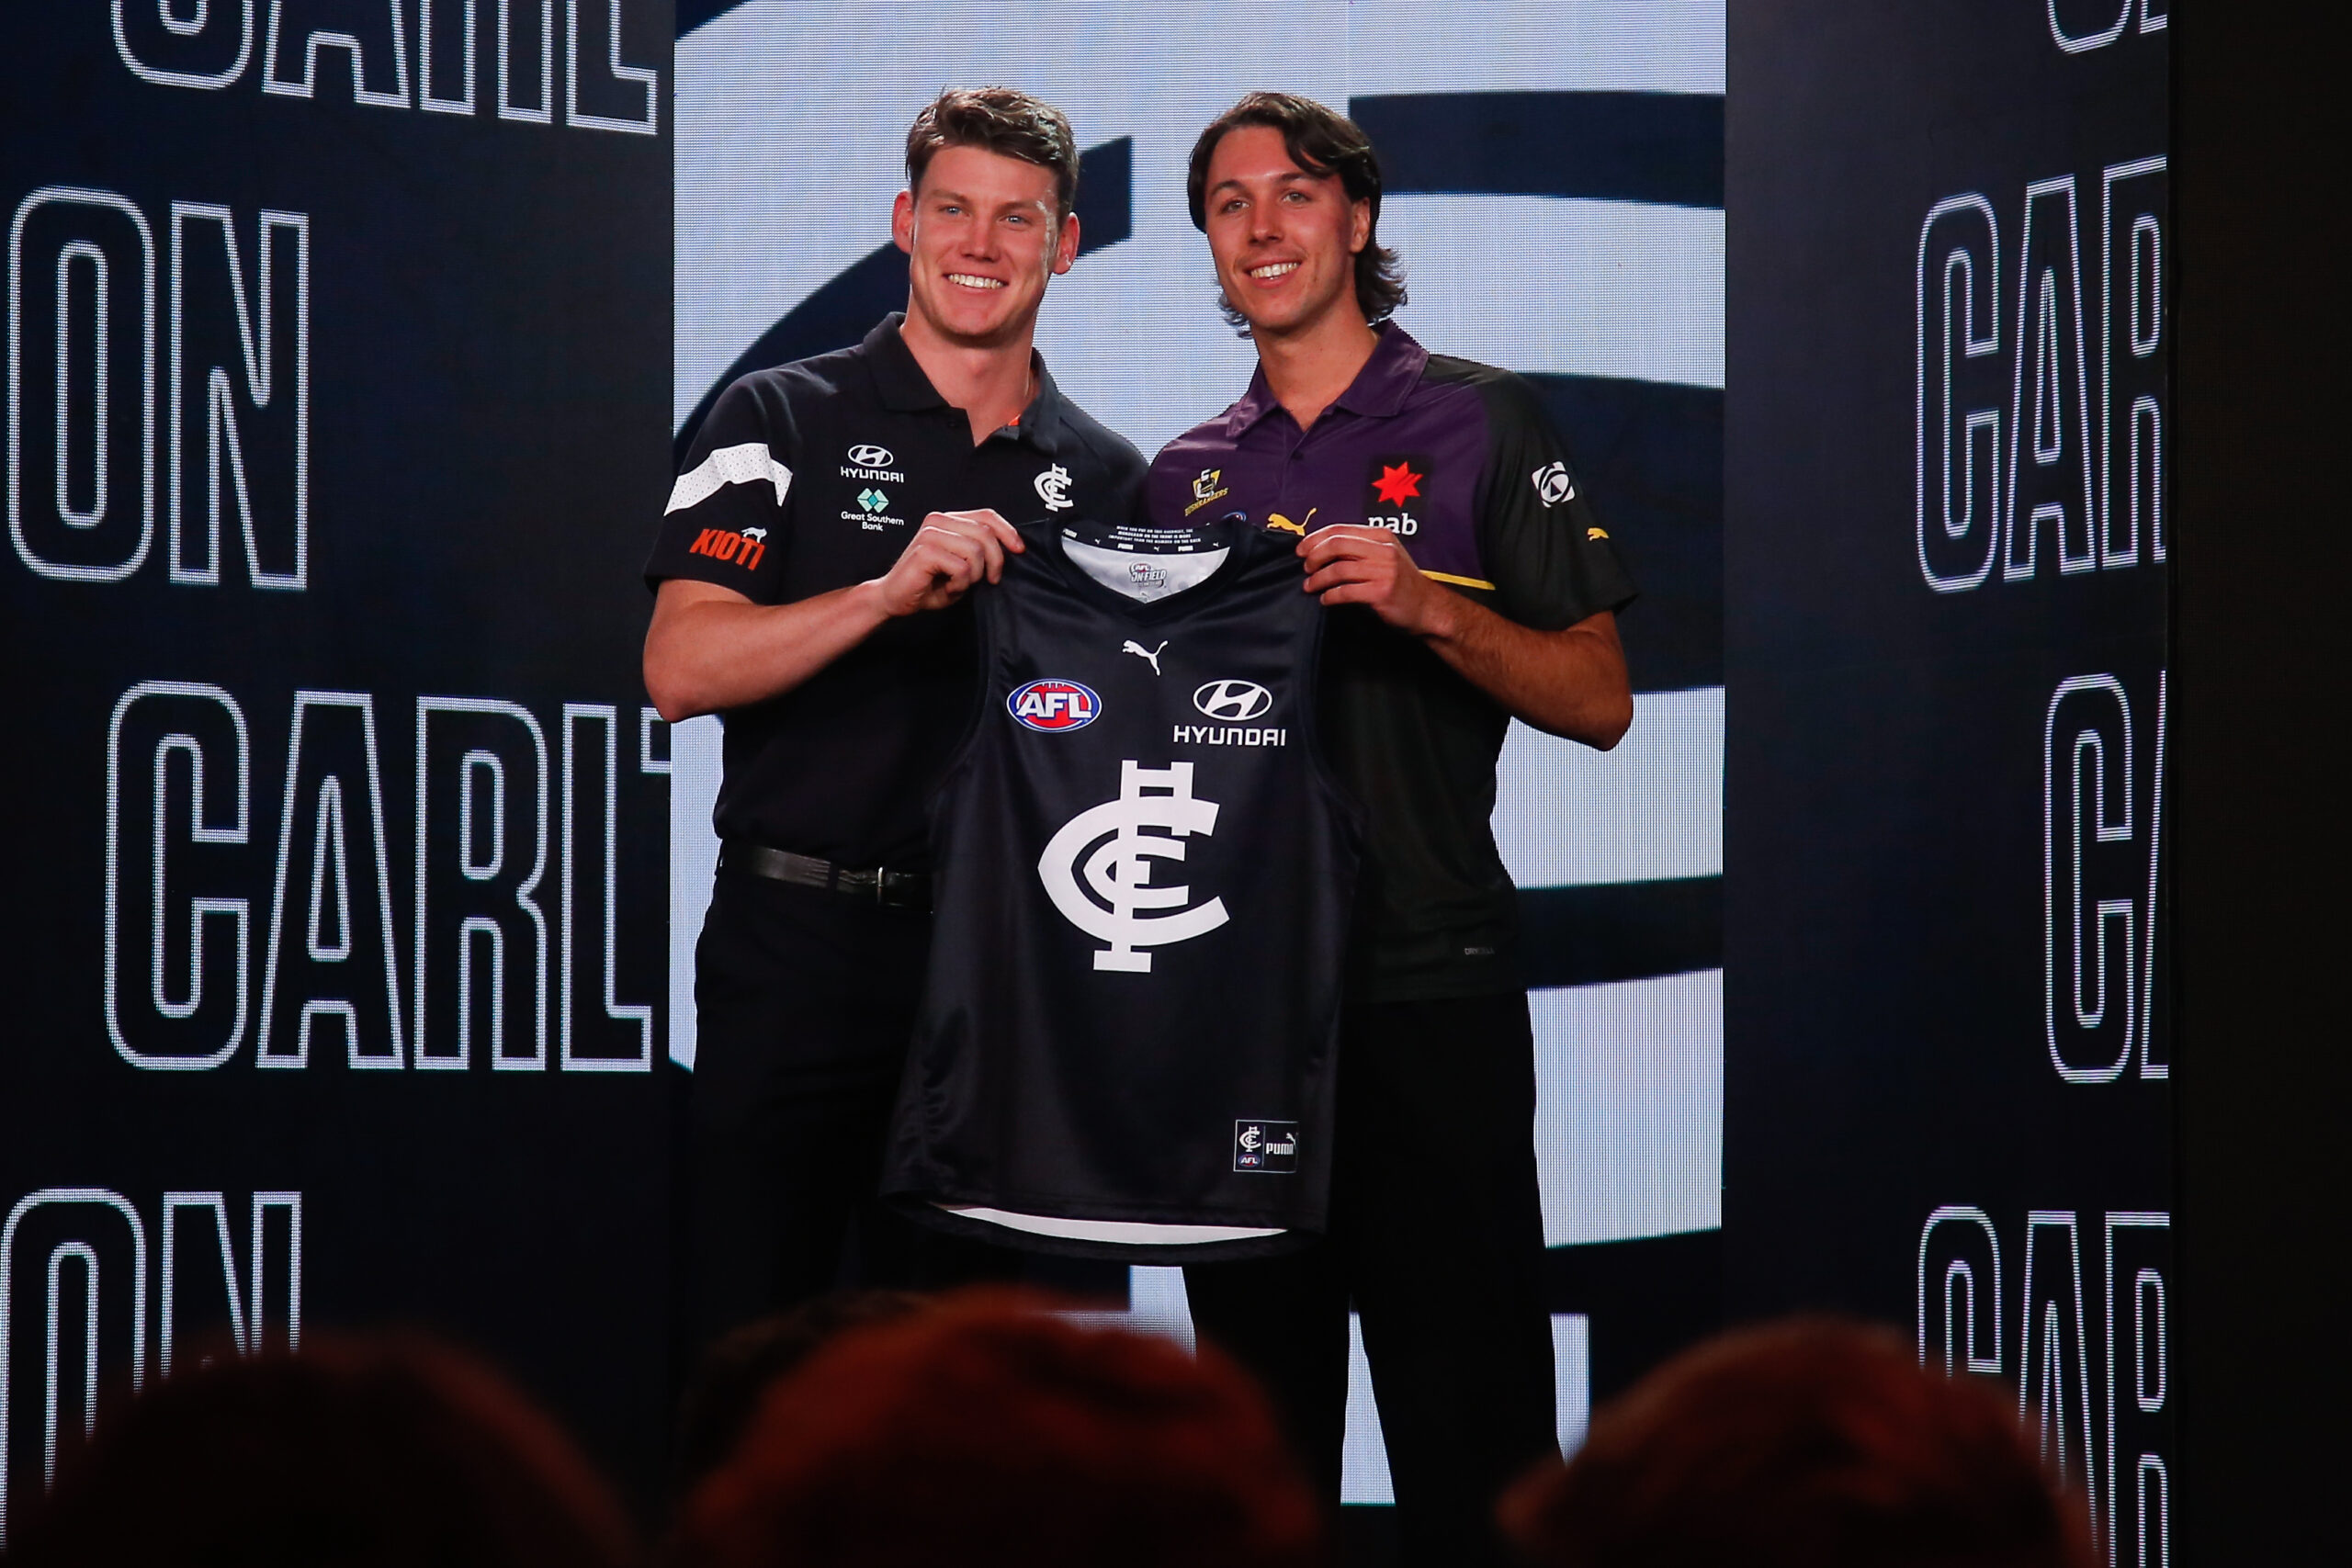 Fremantle's Darcy Tucker to debut against Carlton, while